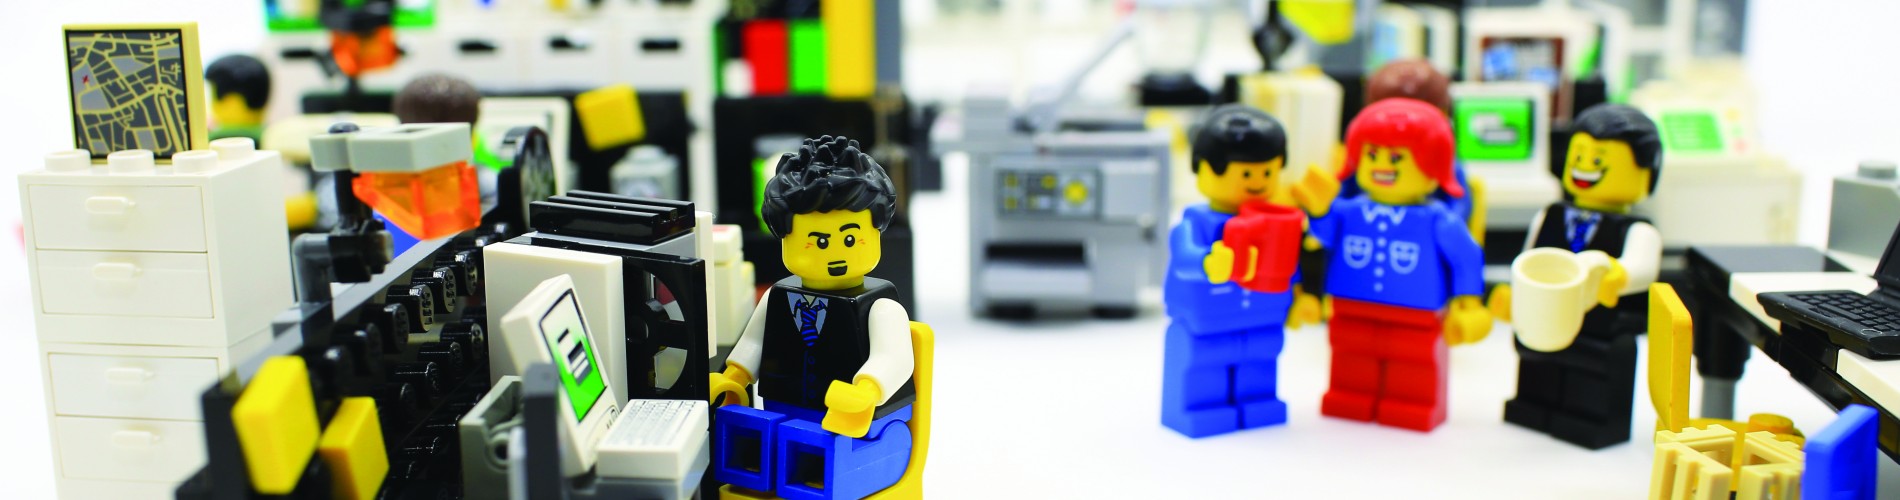 Lego figurines in an office